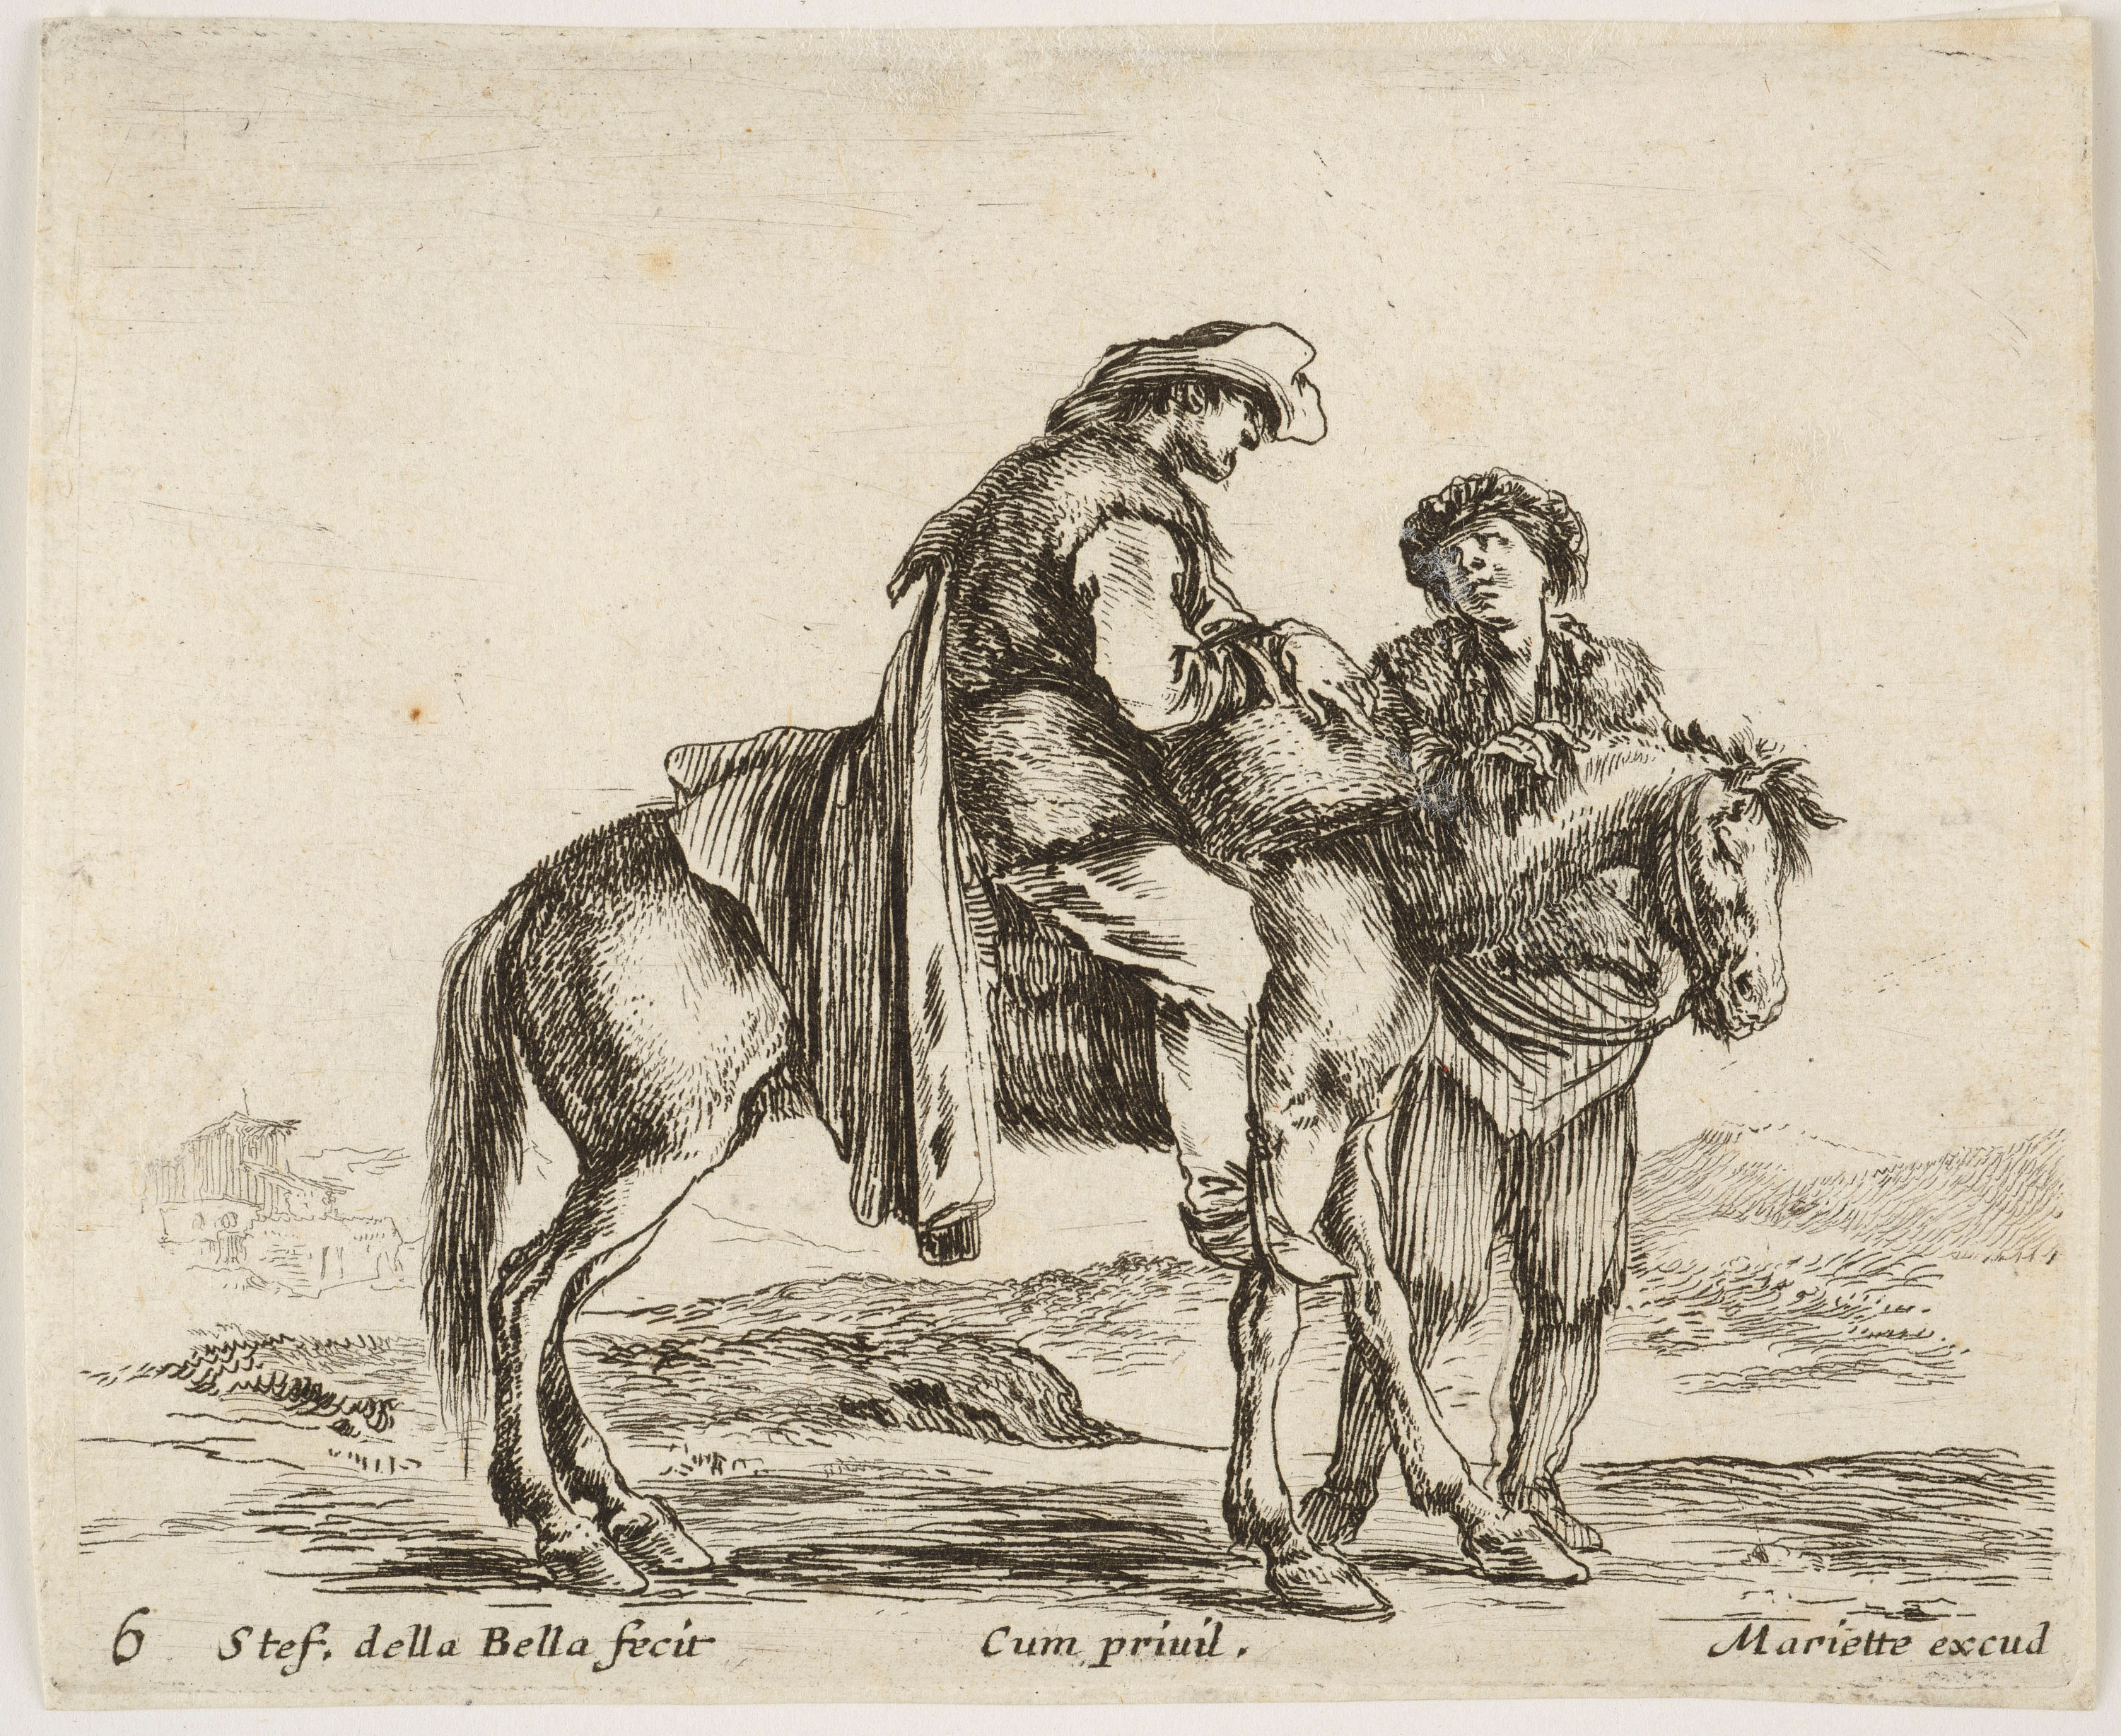 <p><strong>Stefano Della Bella</strong><br />
<em>A Peasant on Horseback </em>1644-1647<br />
Mackelvie Trust Collection, Auckland Art Gallery Toi o Tāmaki<br />
bequest of Dr Walter Auburn, 1982</p>
